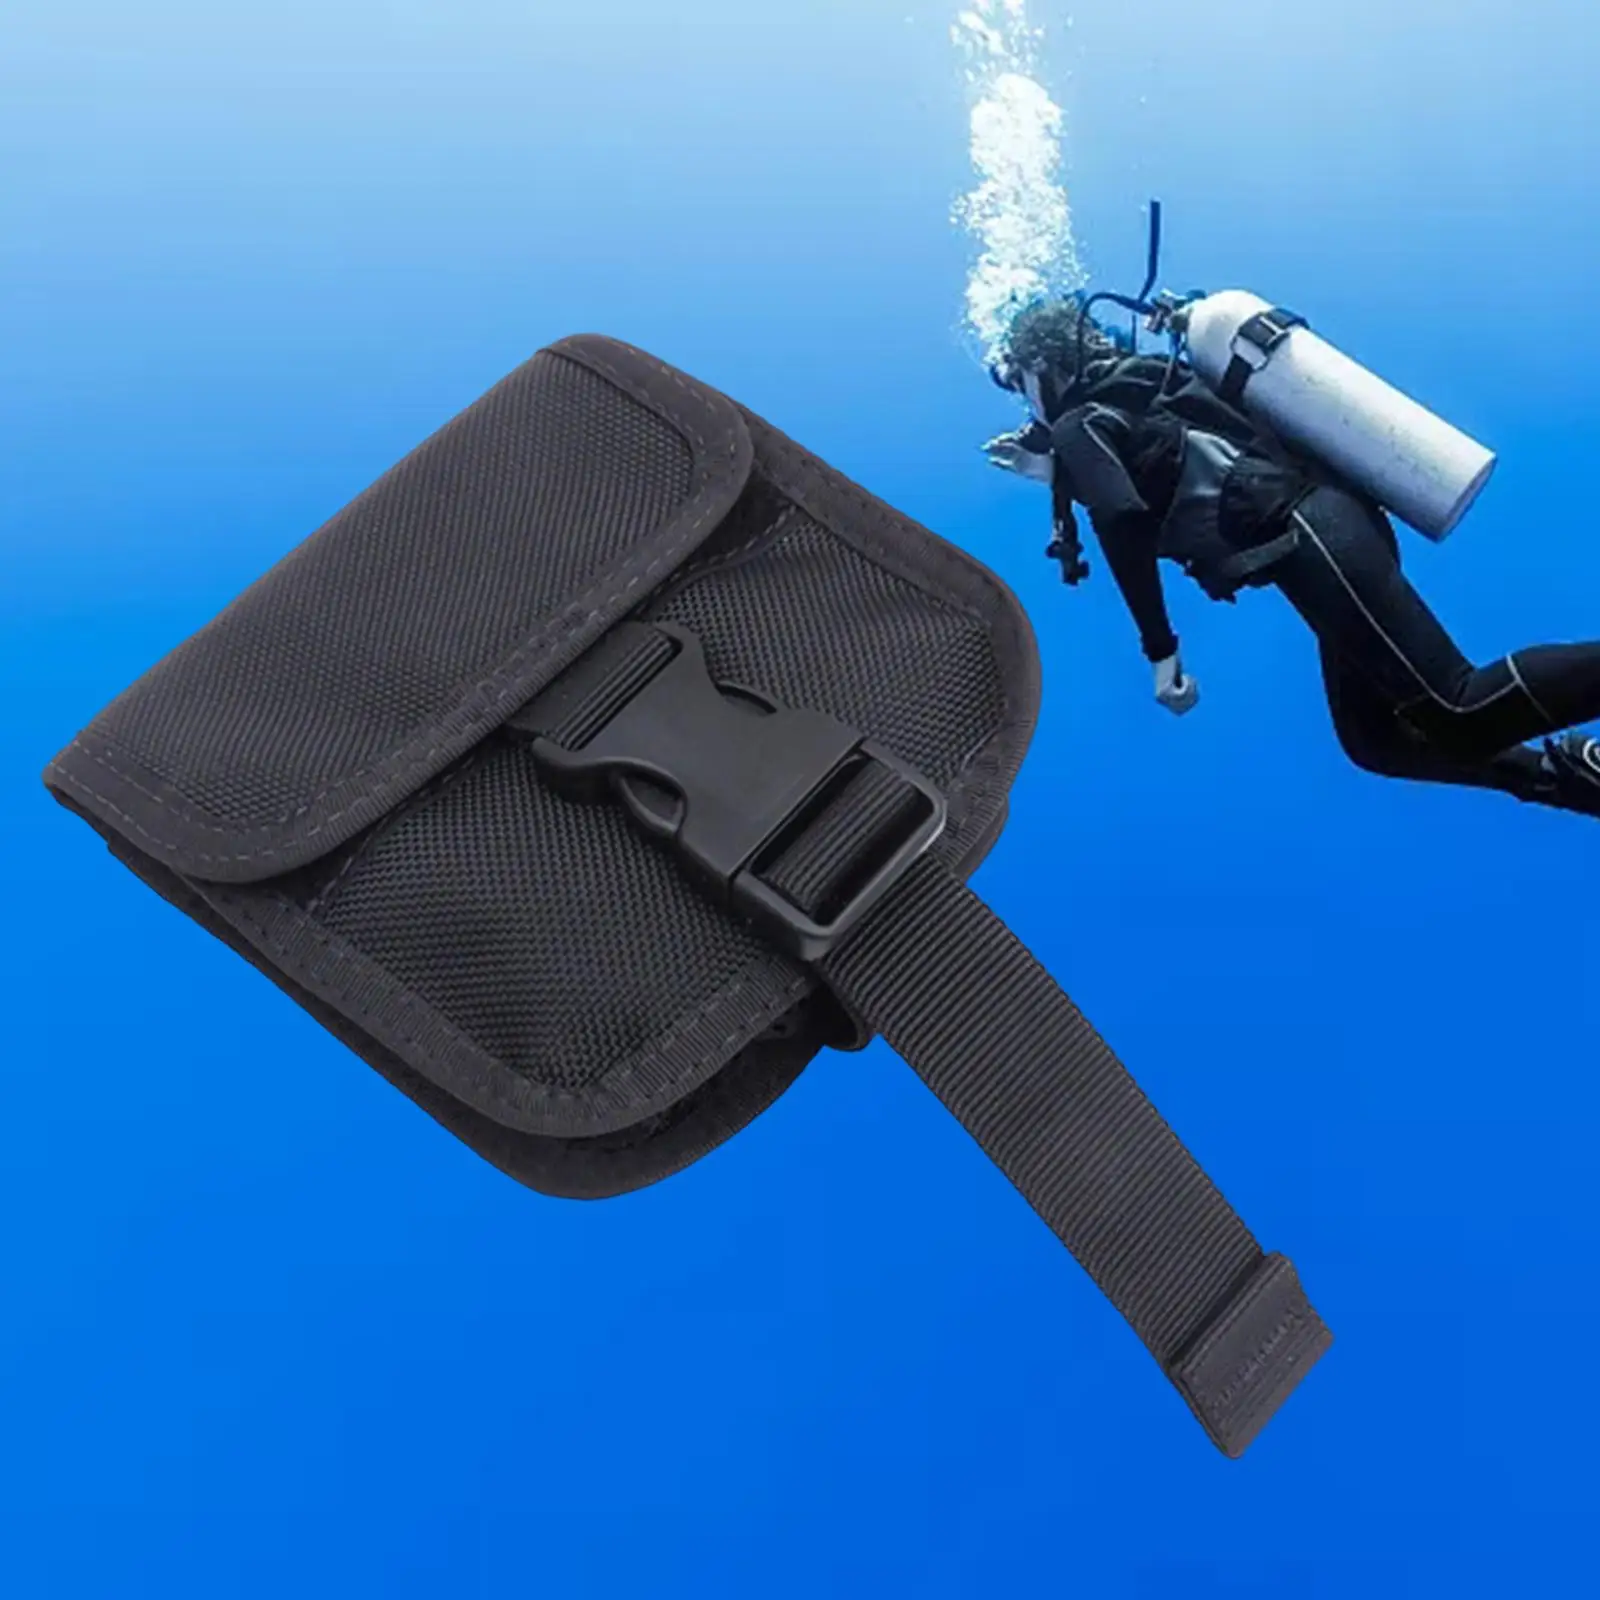 Durable Scuba Diving Mesh Pouch Storage Holder Snorkelling Pocket Gear Bag for Underwater Gears Collecting Seashells Compass